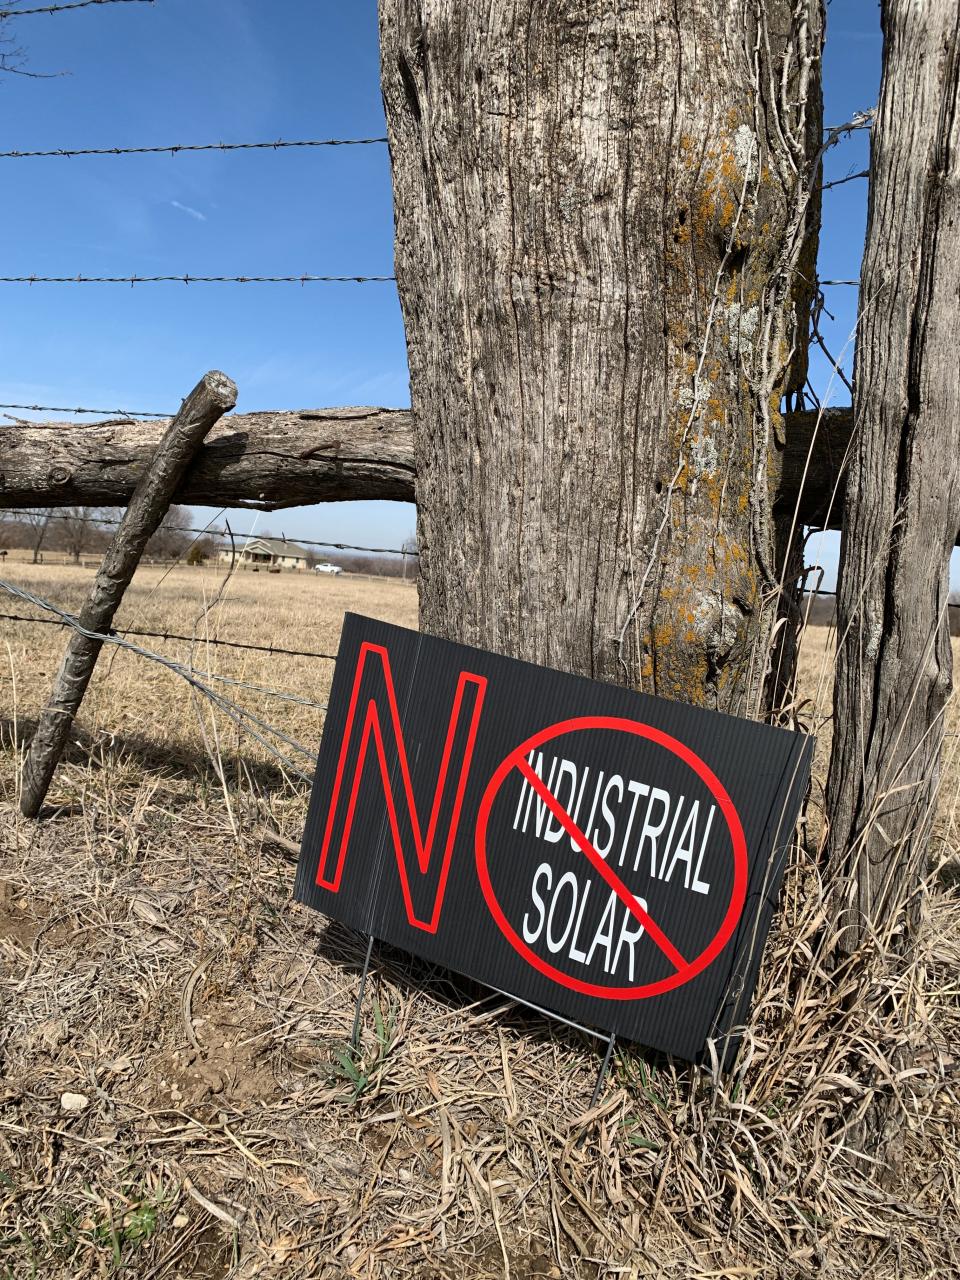 They hoped solar panels would secure the future of their farm. Then their neighbors found out